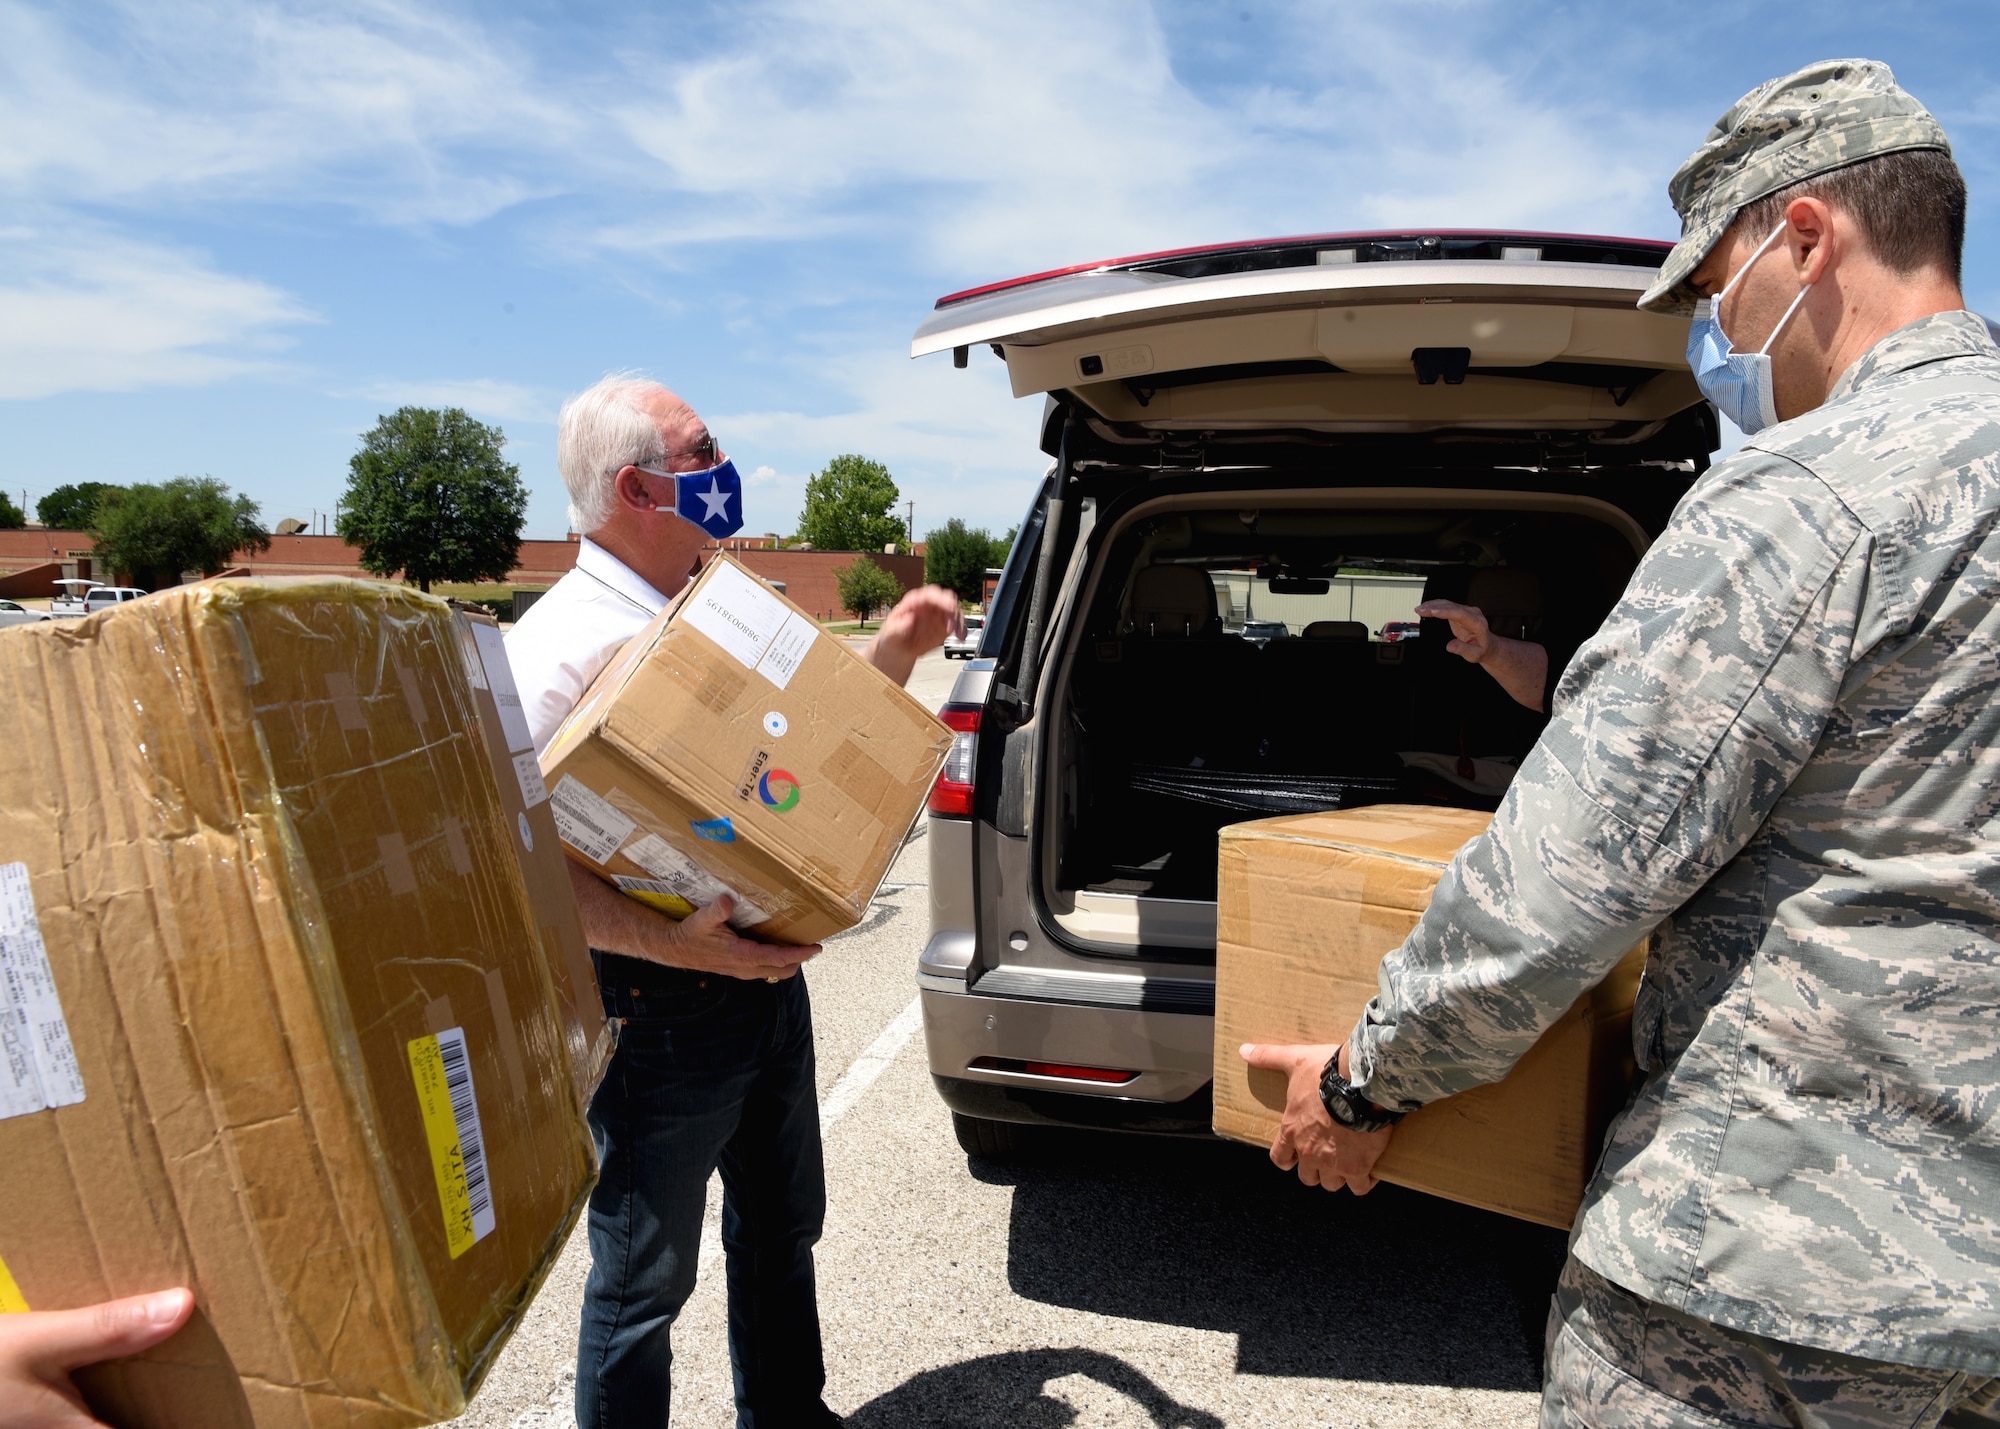 San Angelo Military Advisor Group Co-Chair, Mike Boyd, and U.S. Air Force Airmen from the 17th Training Wing unpack boxes of disposable surgical masks in front of the Norma Brown building on Goodfellow Air Force Base, Texas, April 28, 2020. The masks donated were a token of appreciation and demonstrate the tight-knit bond between the San Angelo Community and Goodfellow. (U.S. Air Force photo by Airman 1st Class Abbey Rieves)